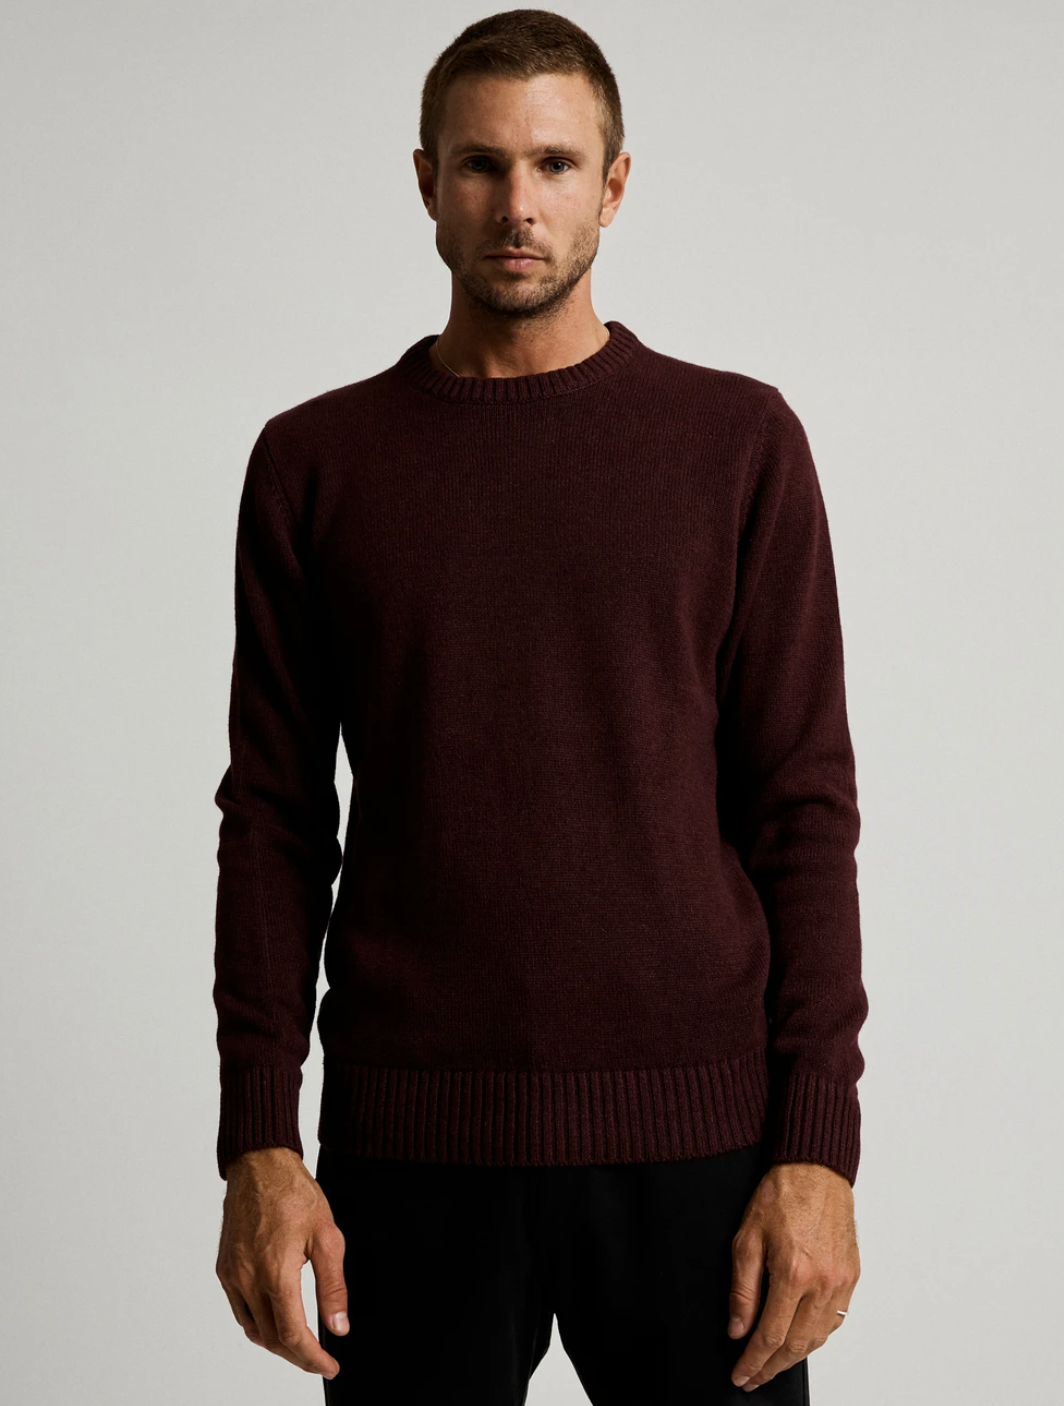 Mr Simple - Standard Knit / Wine | Buster McGee Daylesford